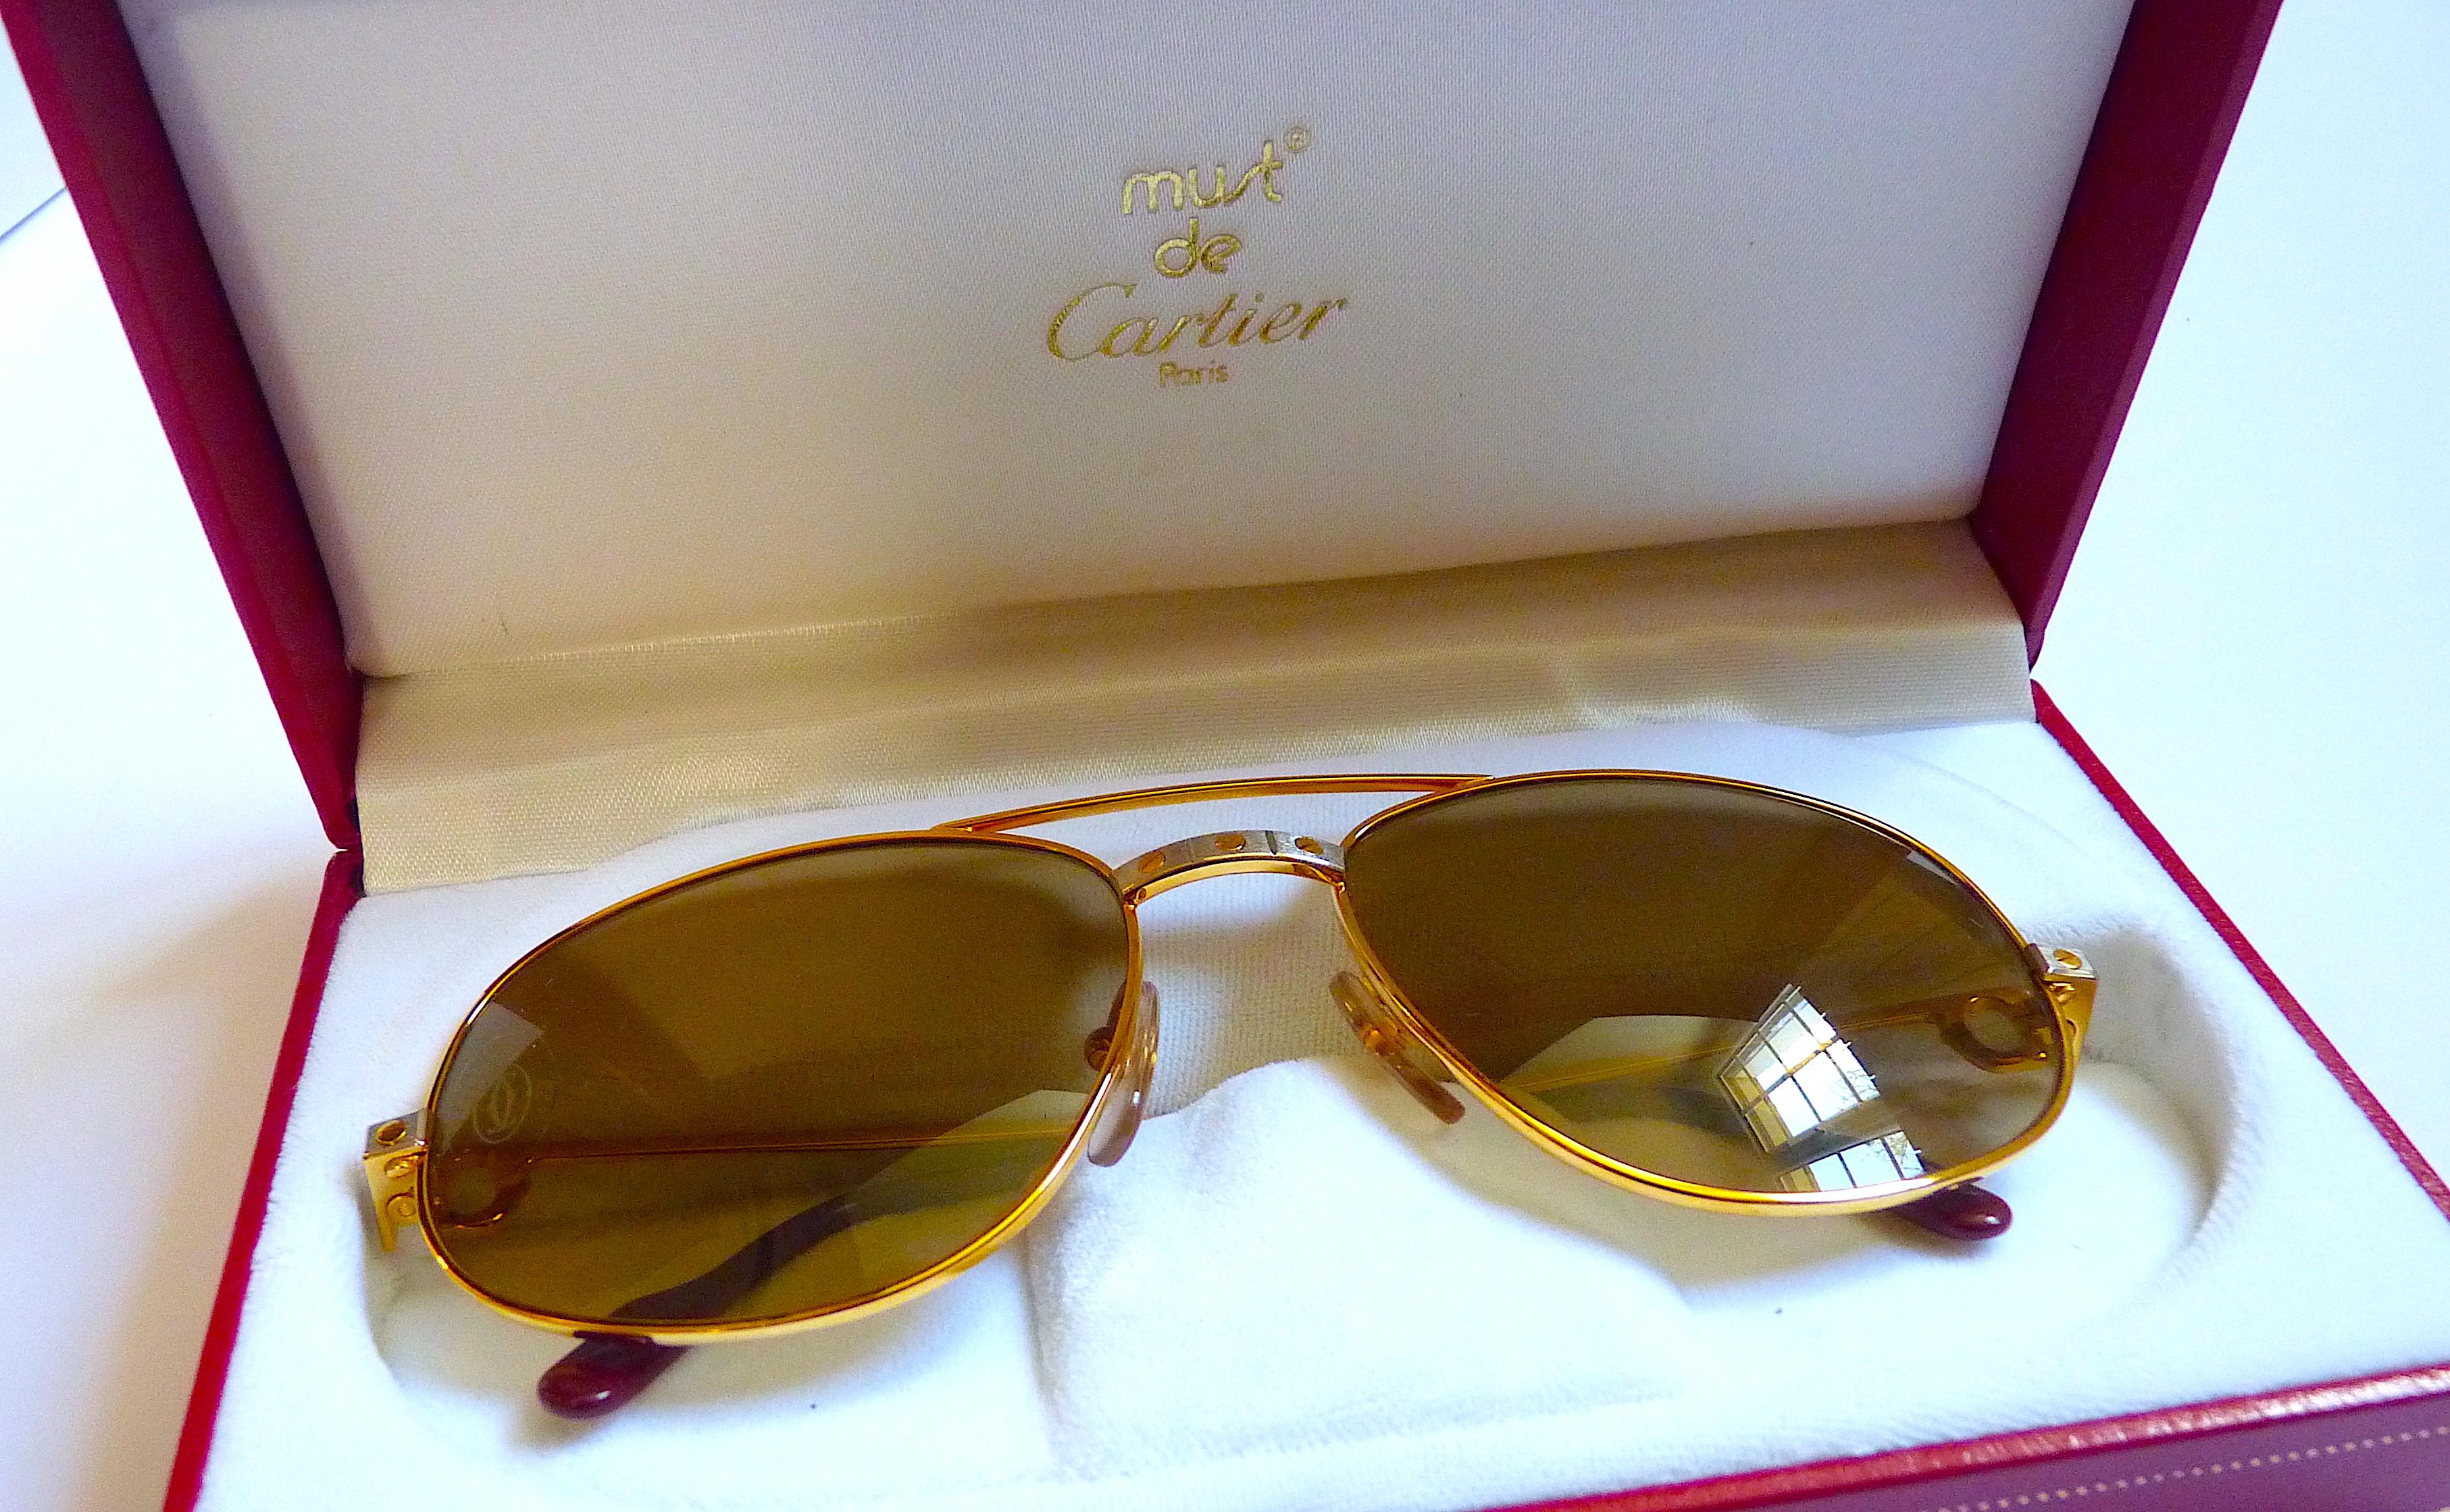 These CARTIER SANTOS Sunglasses are iconic from the 1980's, with Original Packaging, Vintage but never worn

New of Stock, Unworn and Pristine Condition !

Will come with all accessories shown on the pics : authenticity certificate, leather case,